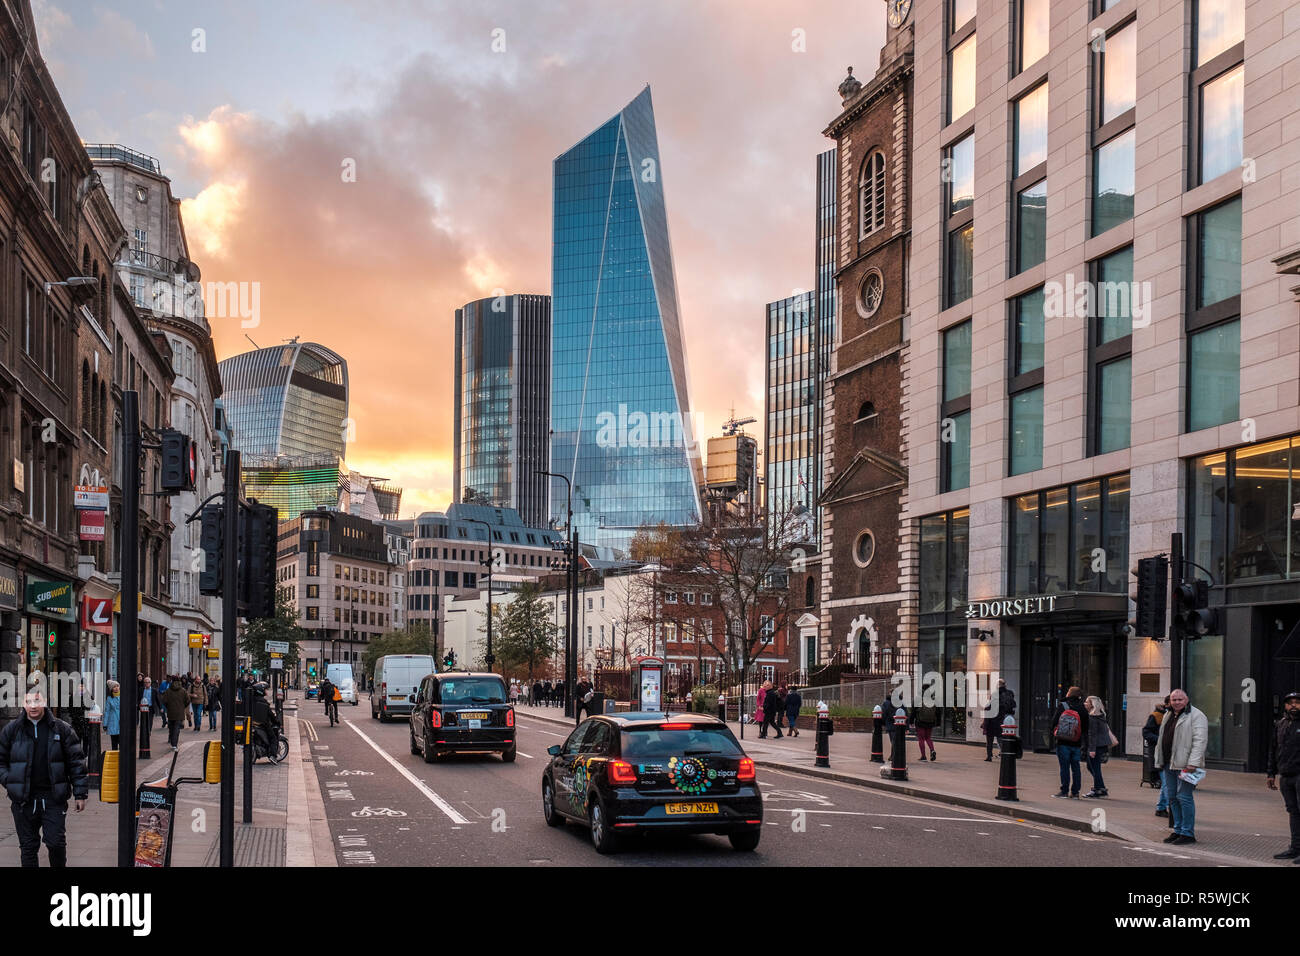 England, London, Aldgate high Street with view of the Financial Centre The city of London Stock Photo